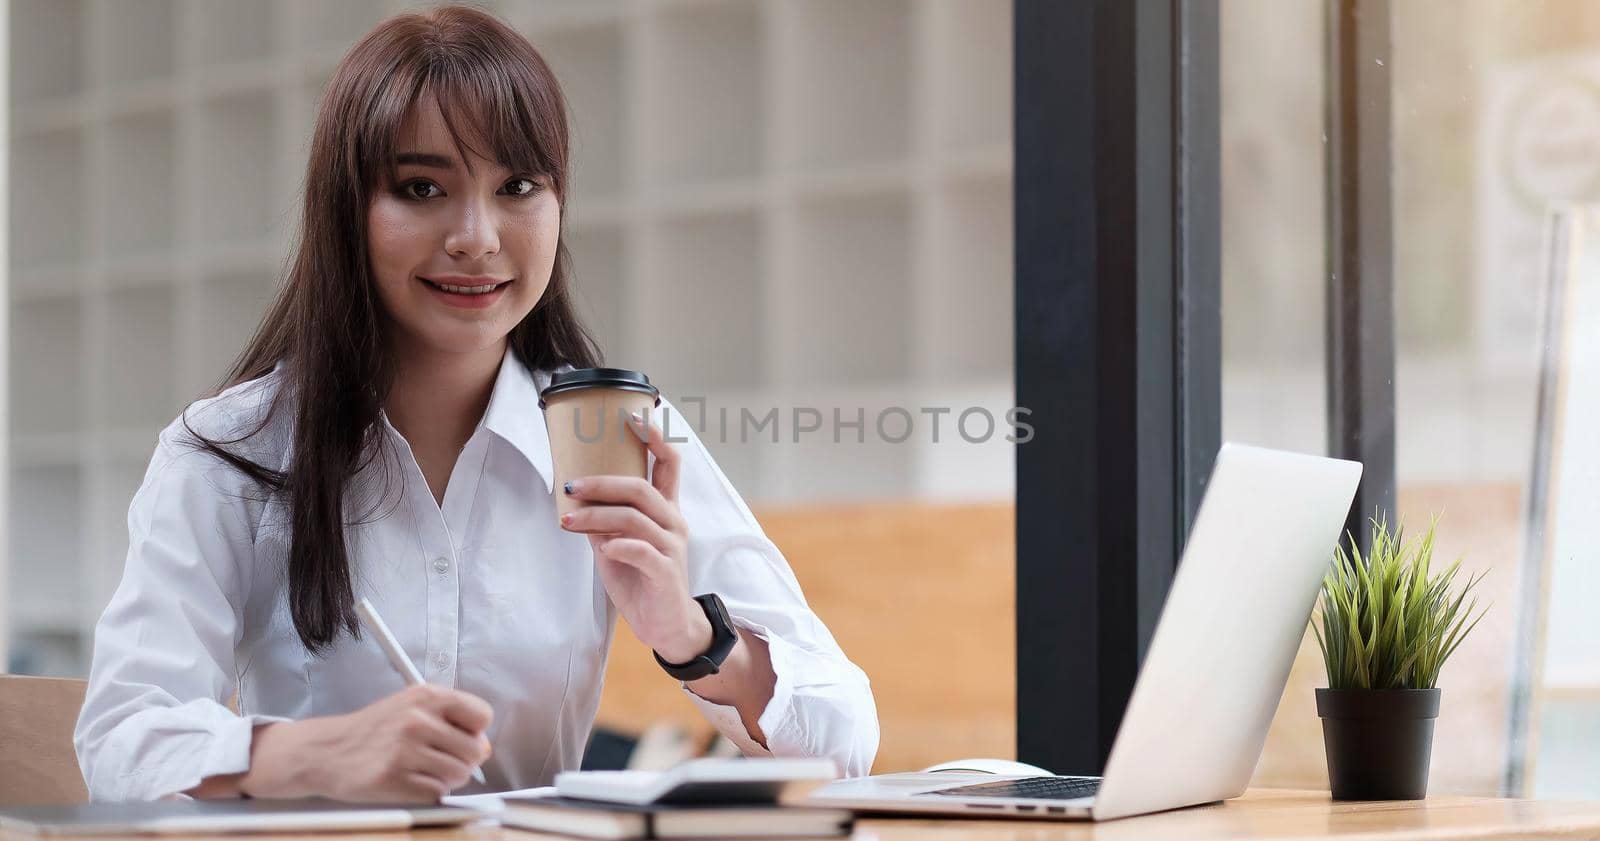 Woman having a tea, sitting on a floor in an office, writing down notes, opened laptop in front of her. Home office concept.